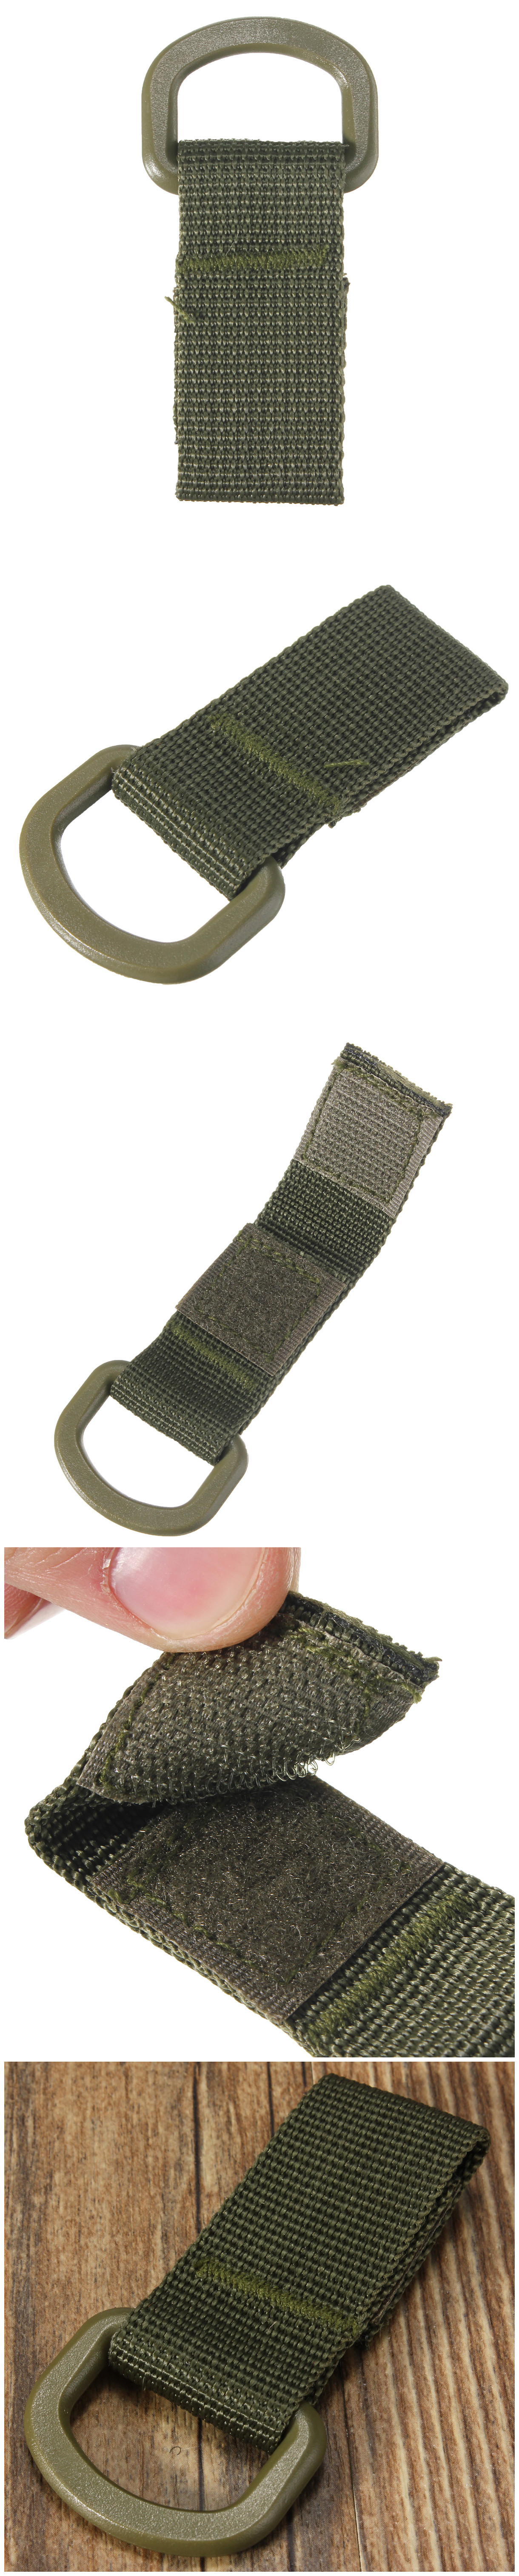 Military-Tactical-Carabiner-Nylon-Strap-Buckle-Hook-Belt-Hanging-Keychain-D-shaped-Ring-Molle-System-1028668-6